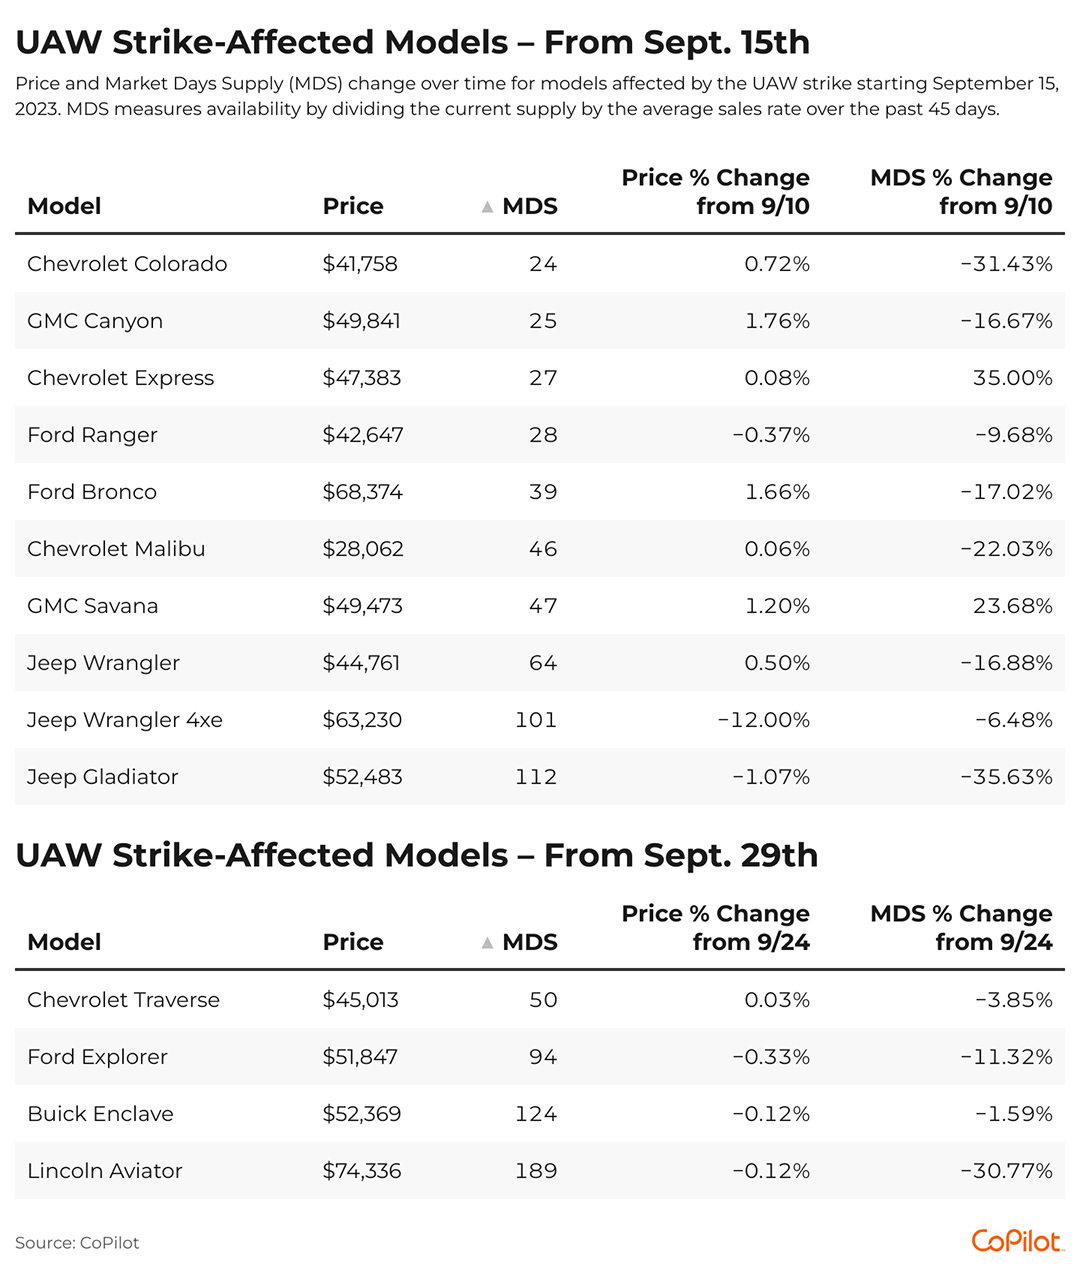 A table showing car models affected by the UAW strike